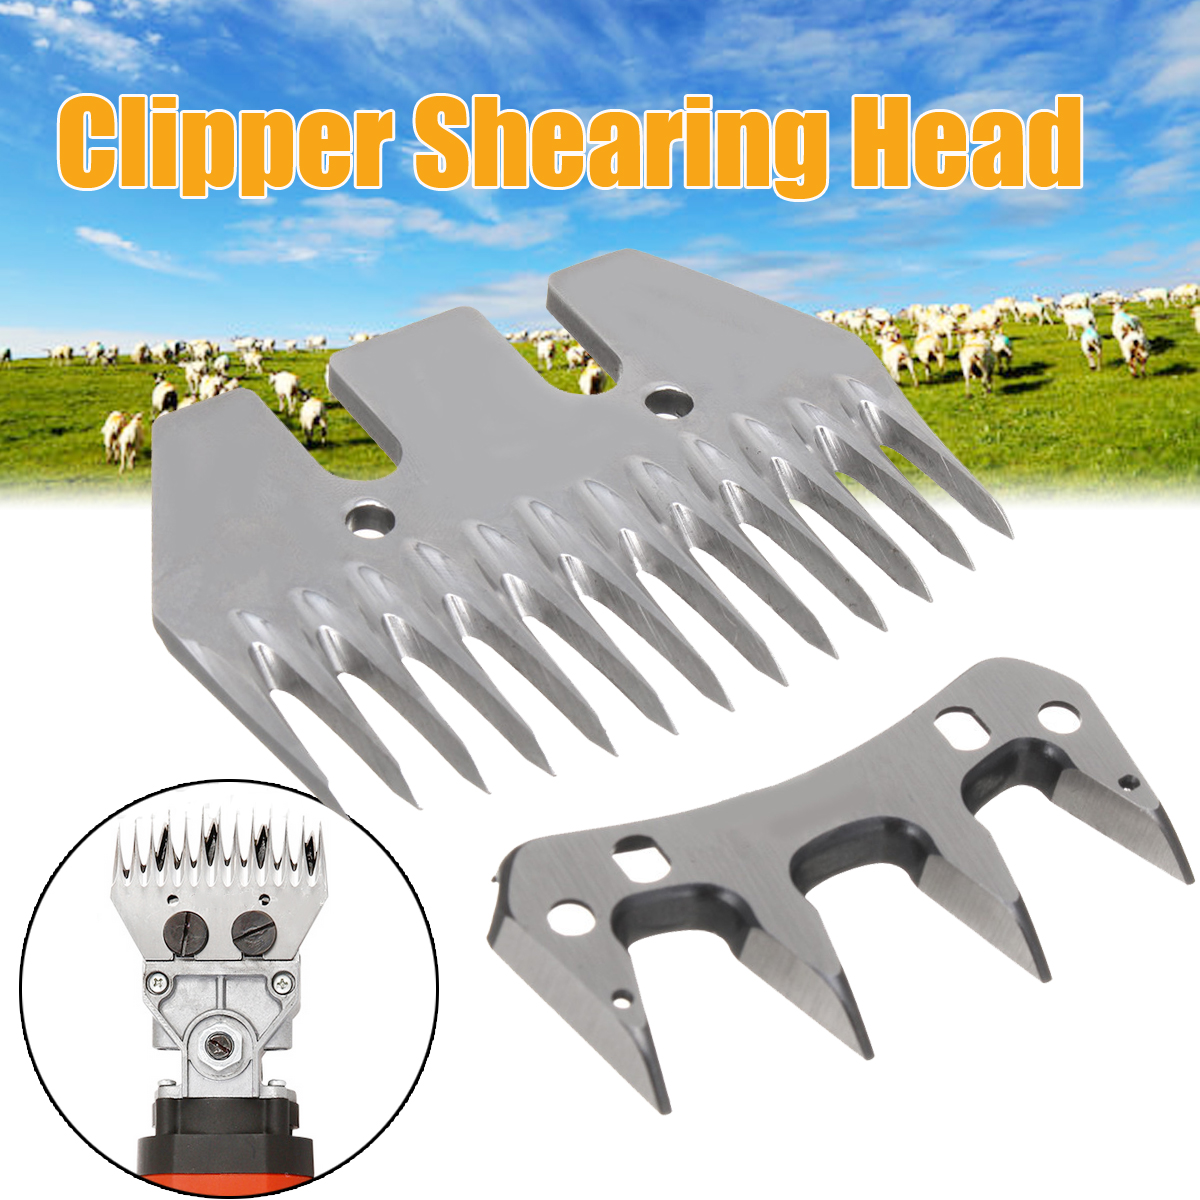 13-Teeth-and-4-Teeth-Clipper-Shearing-Head-For-Electric-Sheep-Goats-Clipper-Replacement-Accessories-1359489-9